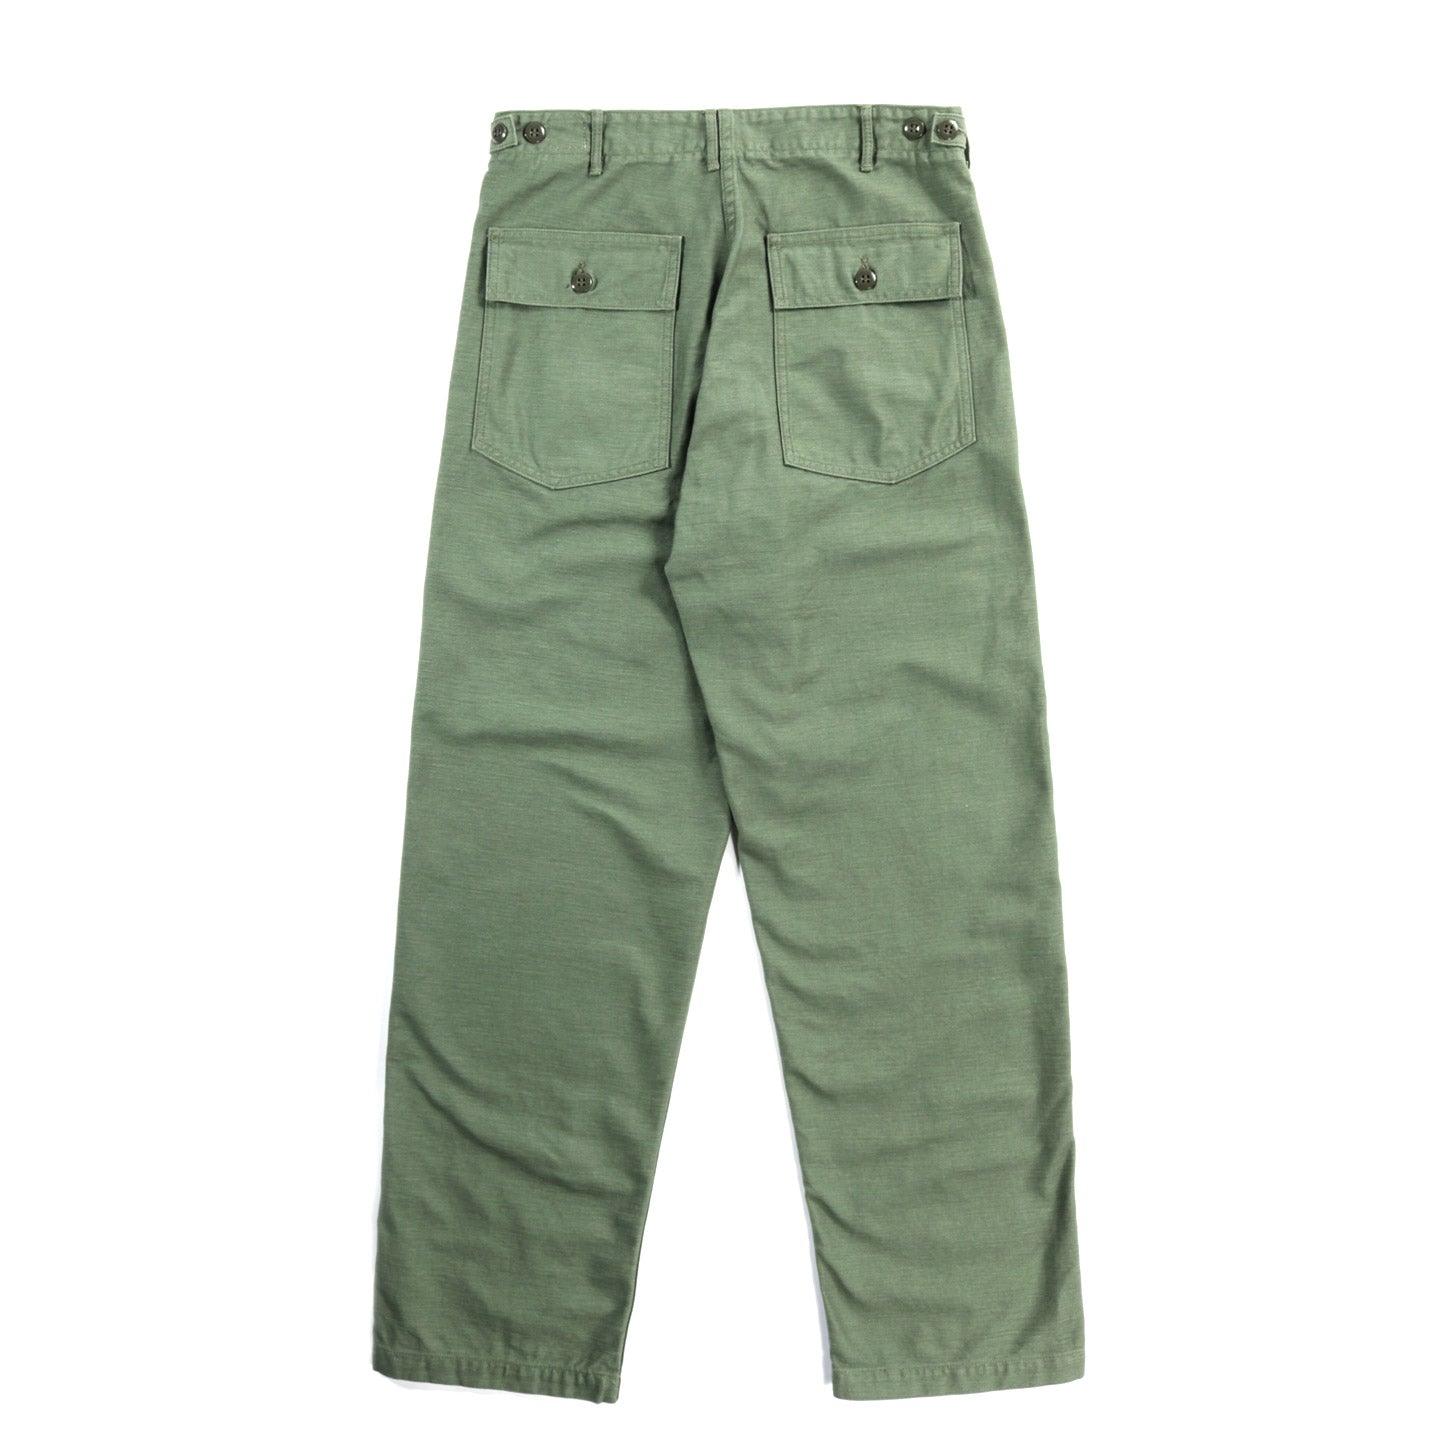 ORSLOW US ARMY FATIGUE PANTS GREEN REVERSE SATEEN